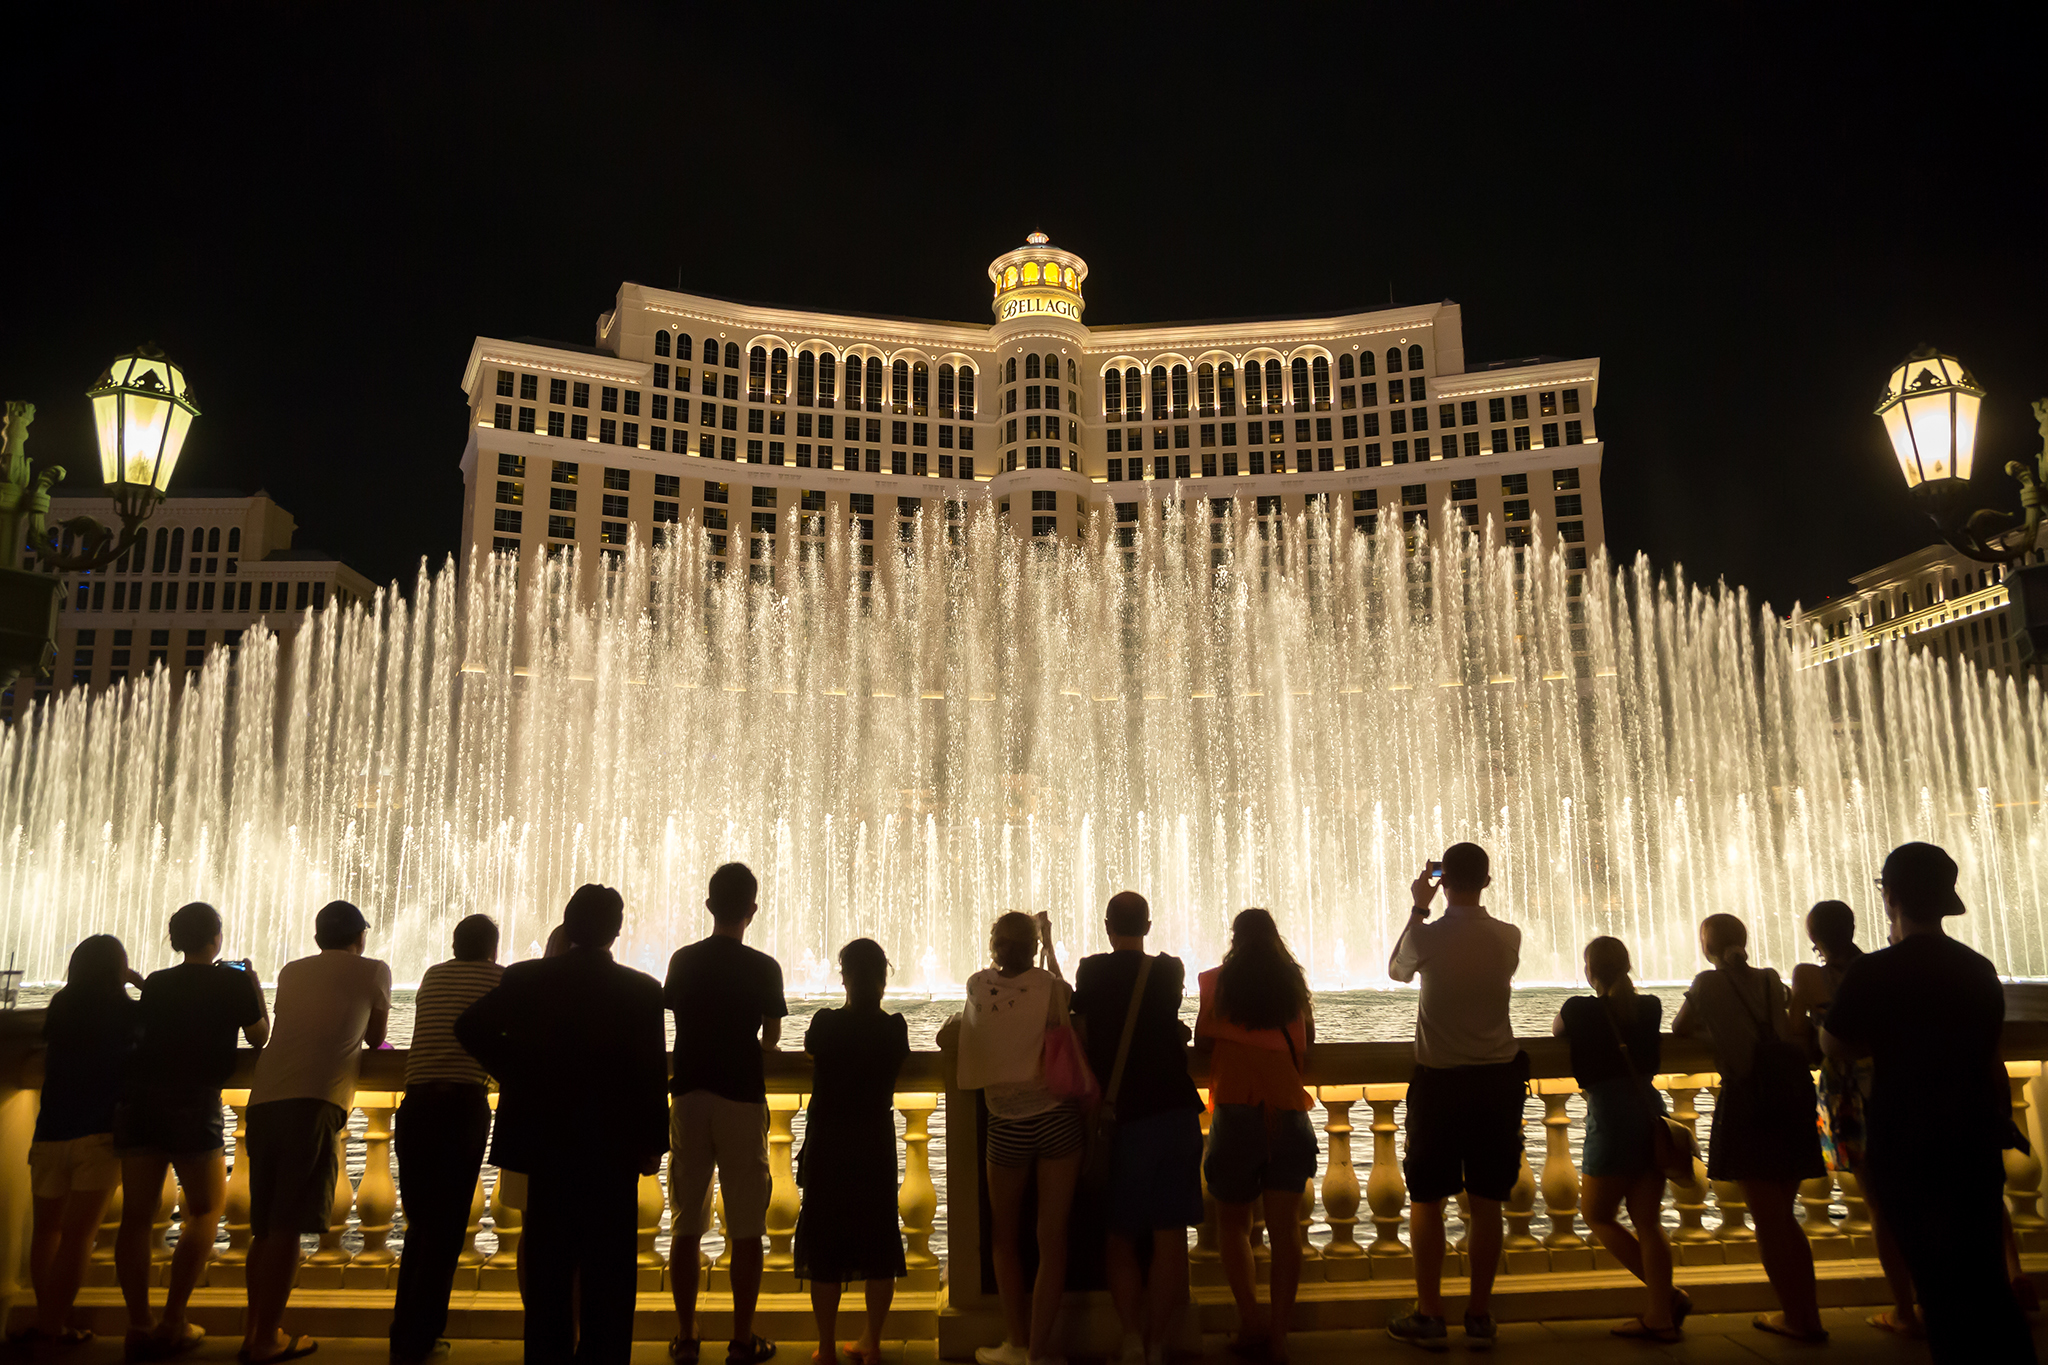 Does Tipping $20 Upon Check-In Work at Bellagio? - Points Miles & Martinis